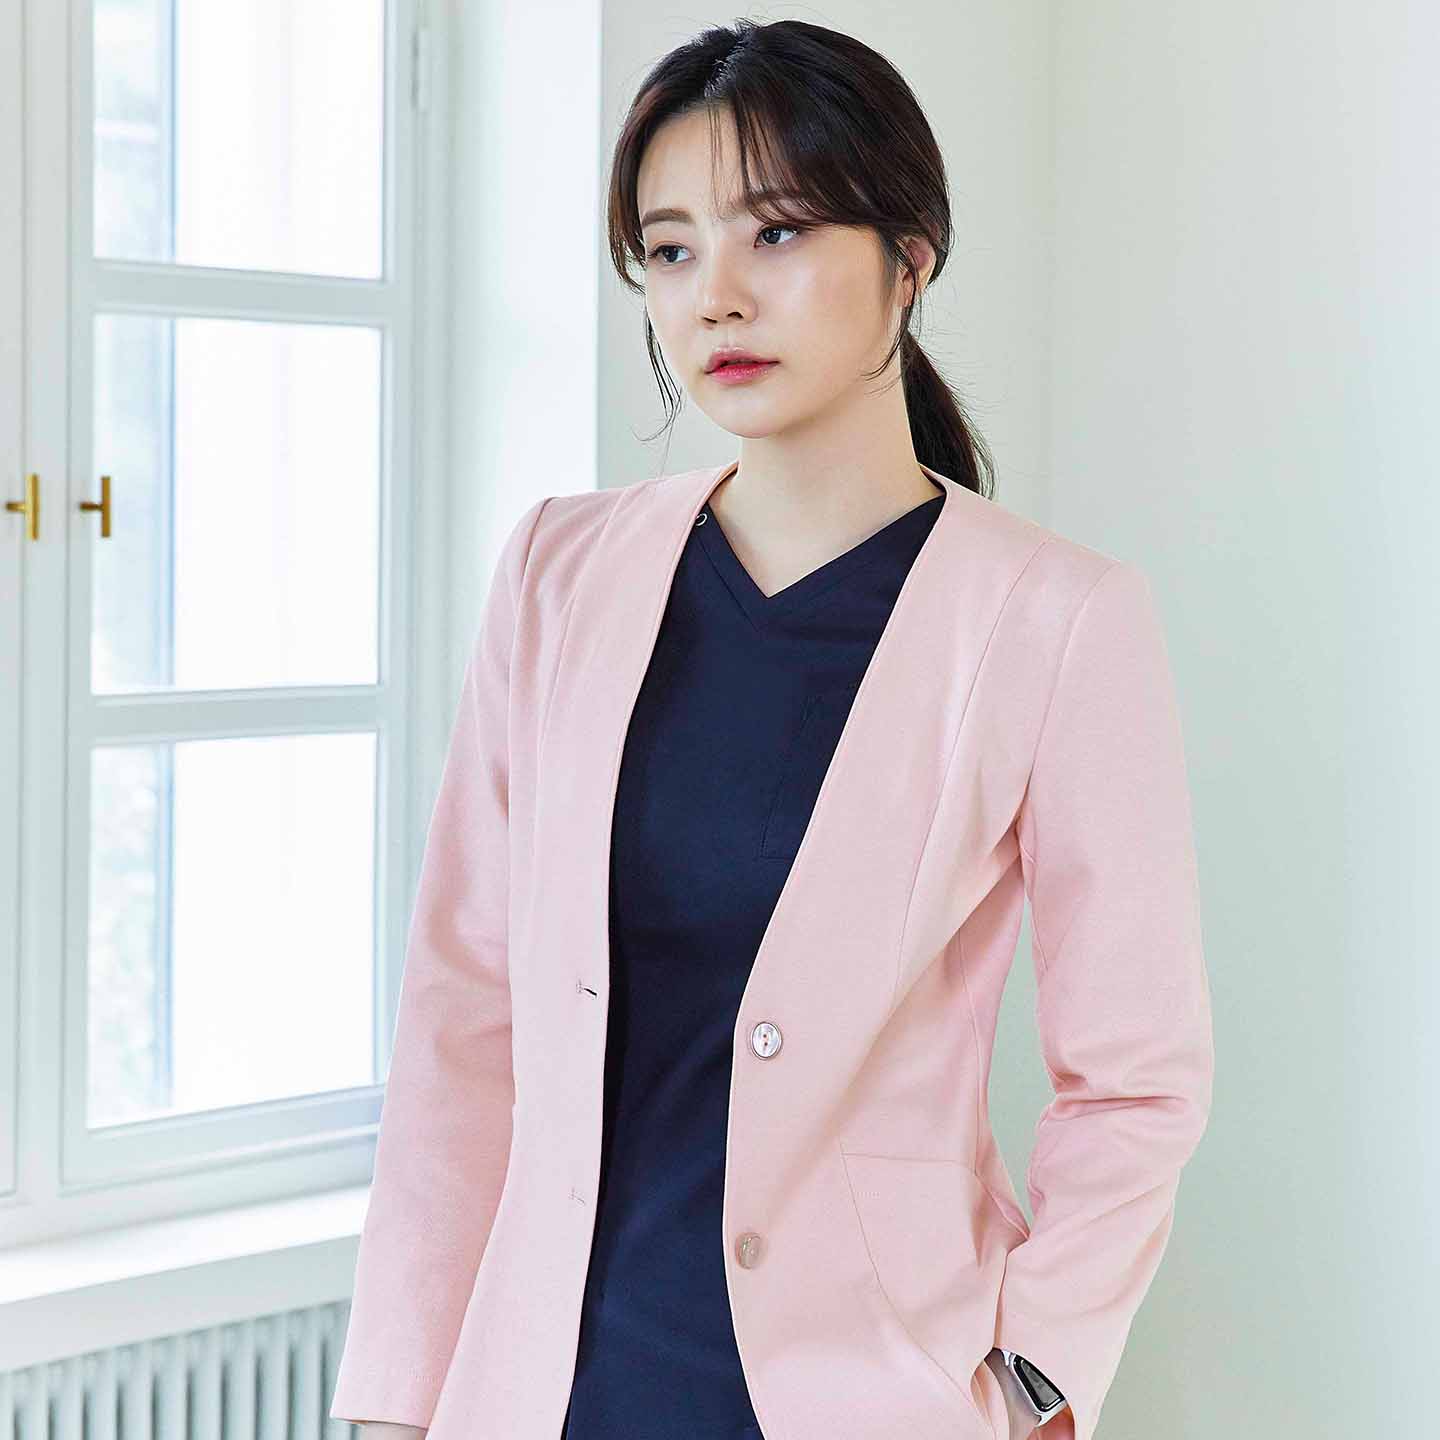 Woman in soft pink Zenir jacket over navy top, standing with hand in pocket, looking slightly away,Soft Pink